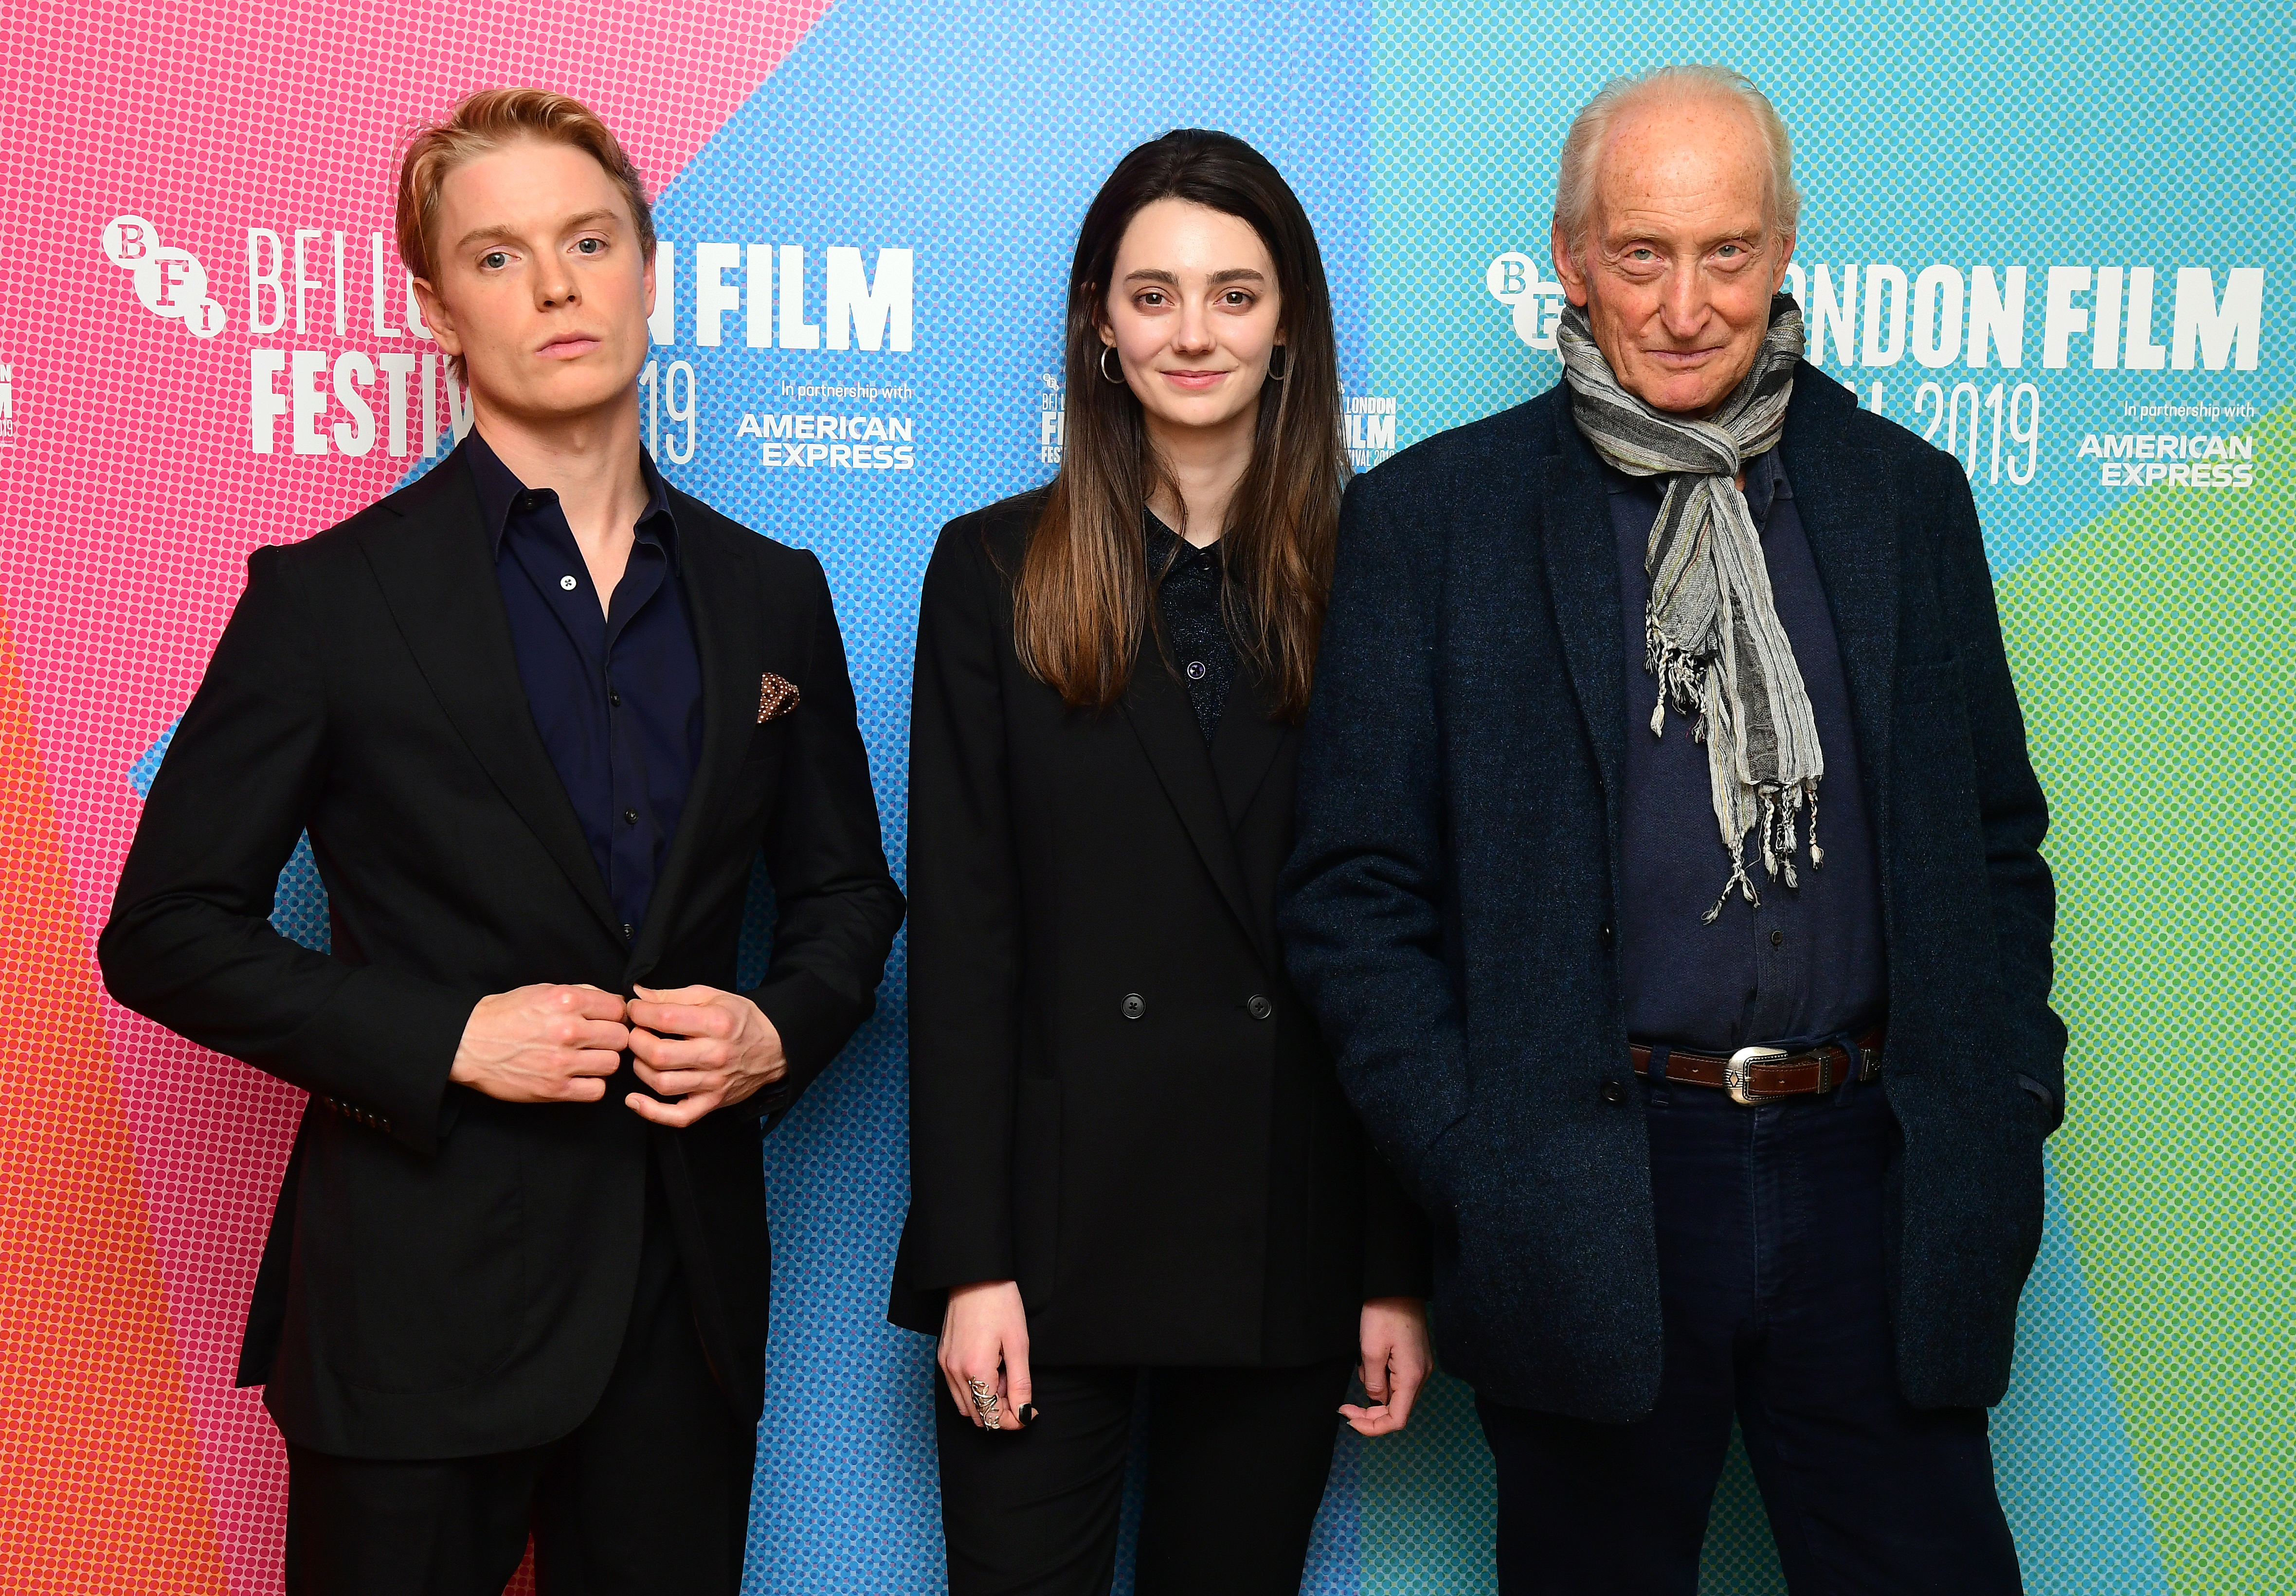 Freddie Fox, Tanya Reynolds, and Charles Dance at the premiere of "Fanny Lye Deliver'd" during the BFI London Film Festival on October 10, 2019, in Southbank, London. | Source: Getty Images